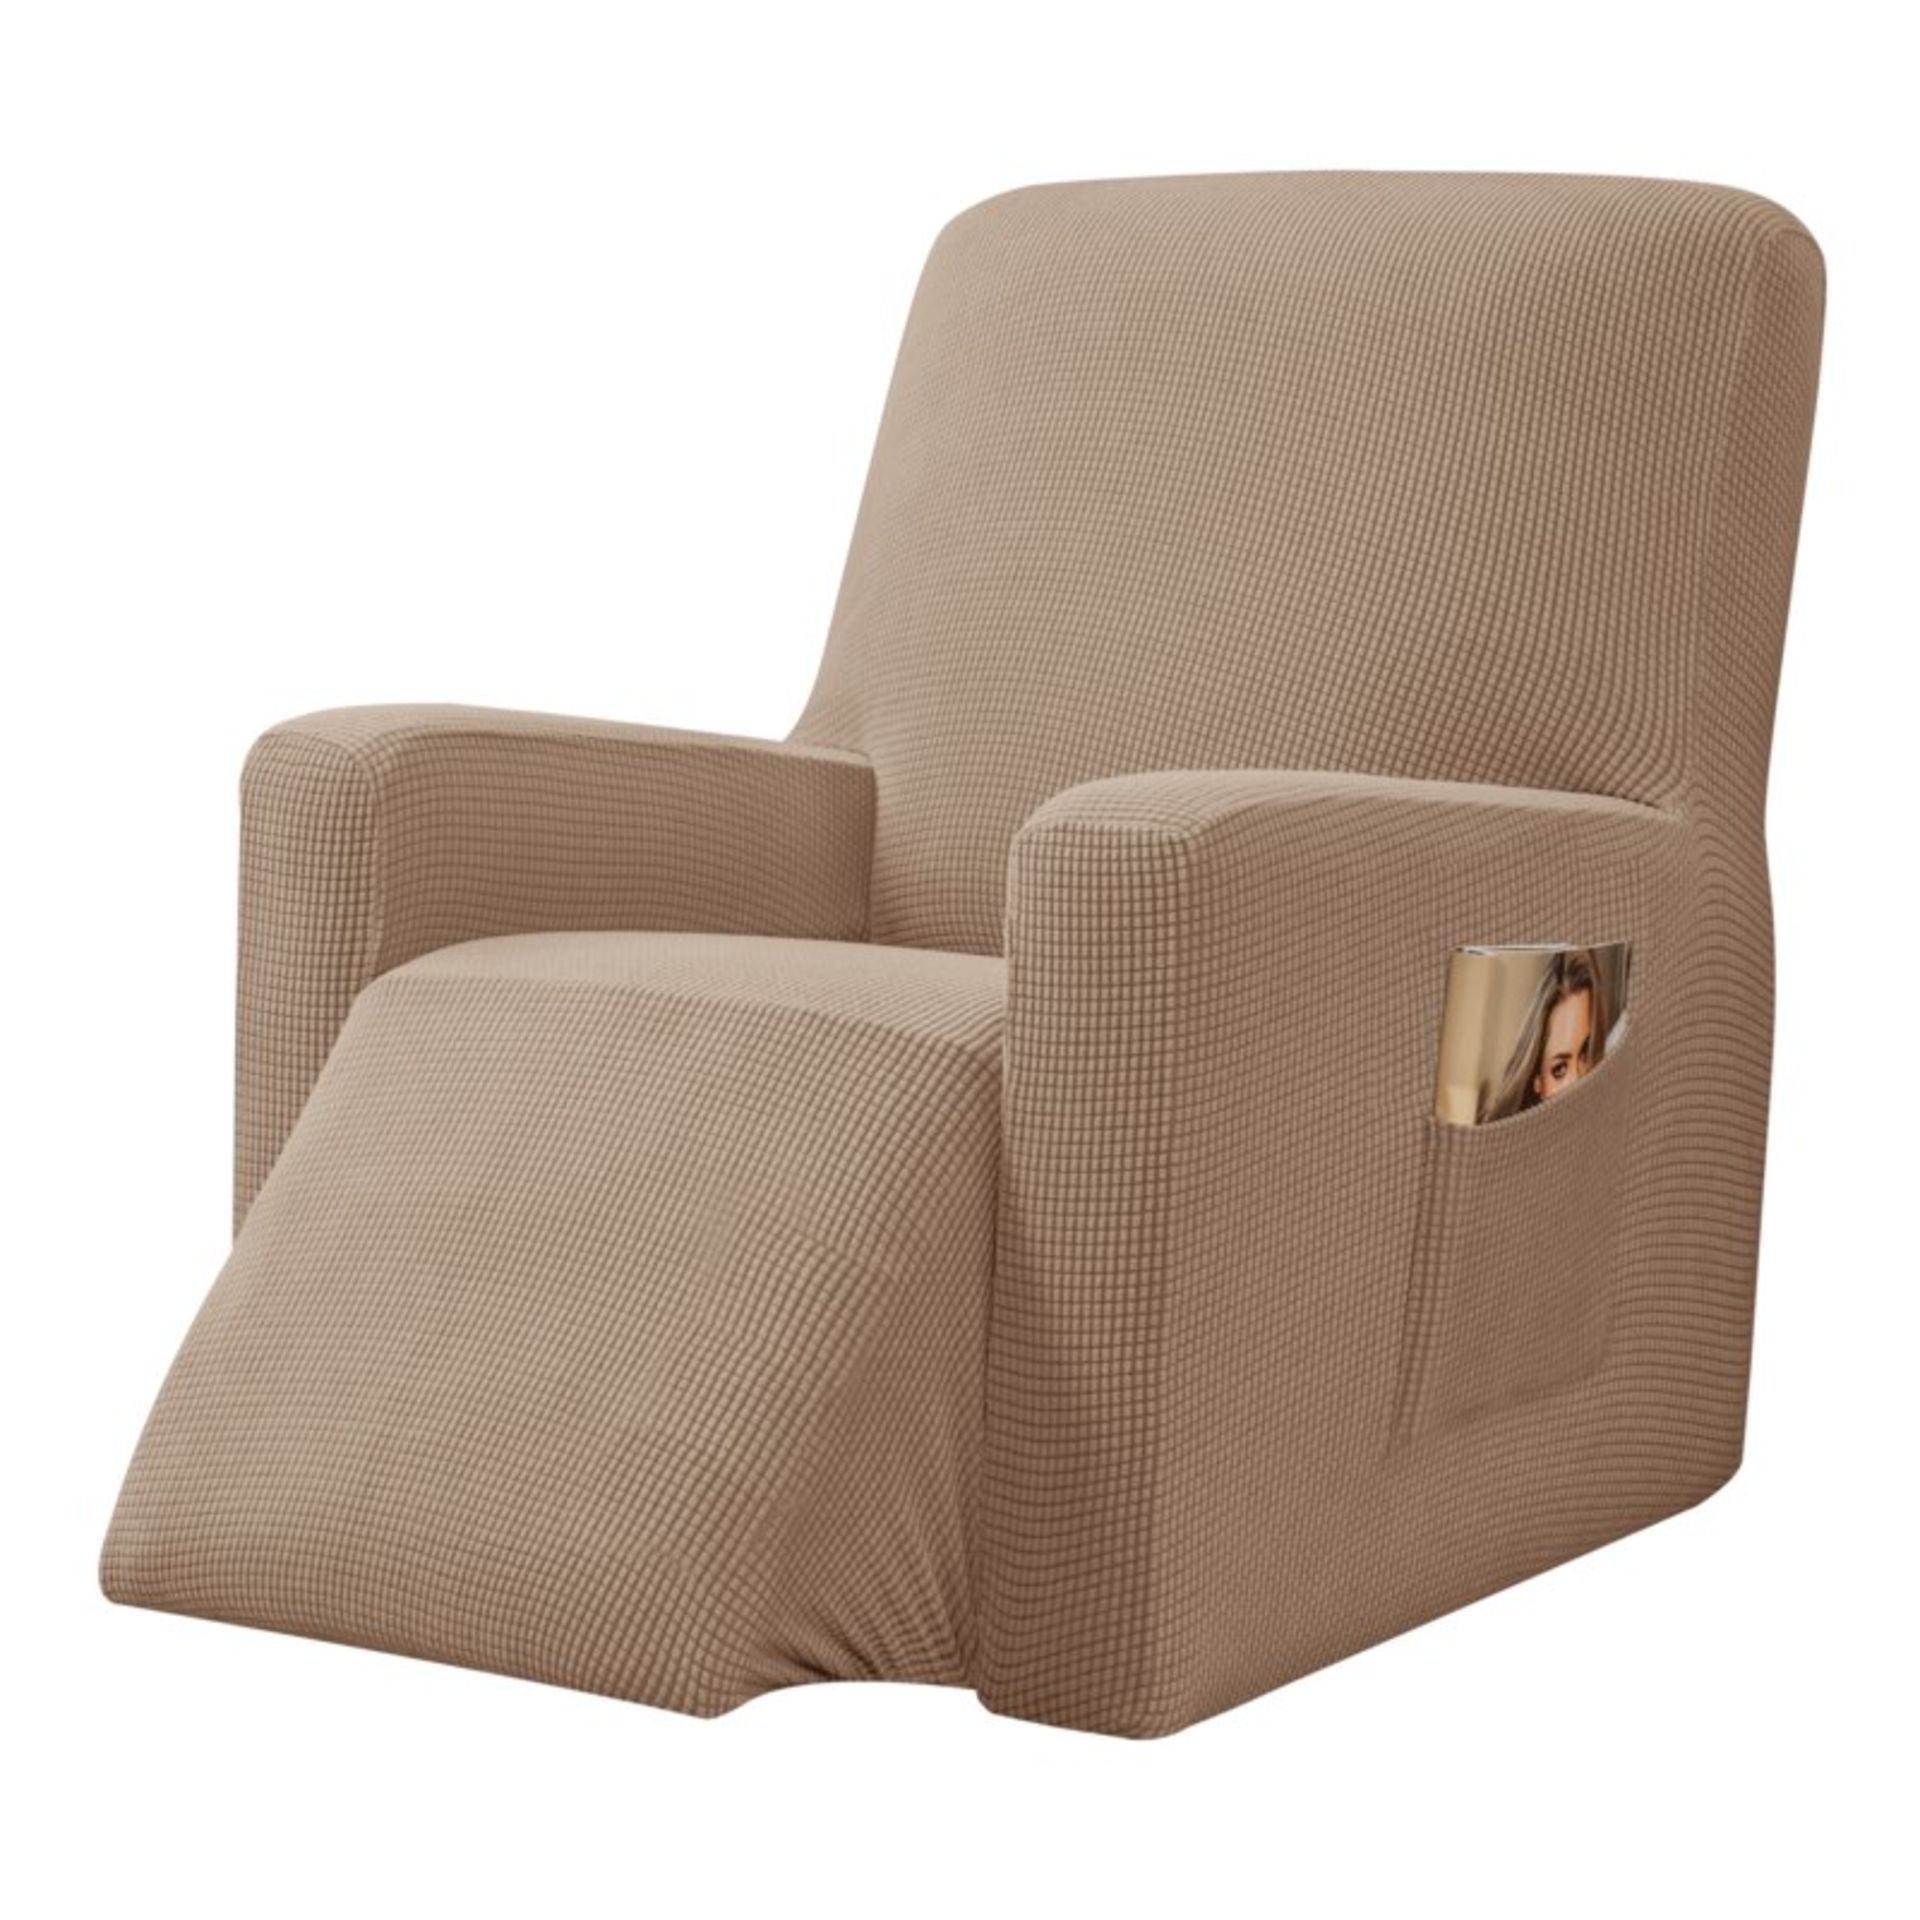 Jacquard Soft Stretchy Box Cushion Recliner Slipcover - RRP £46.99 Cover Only